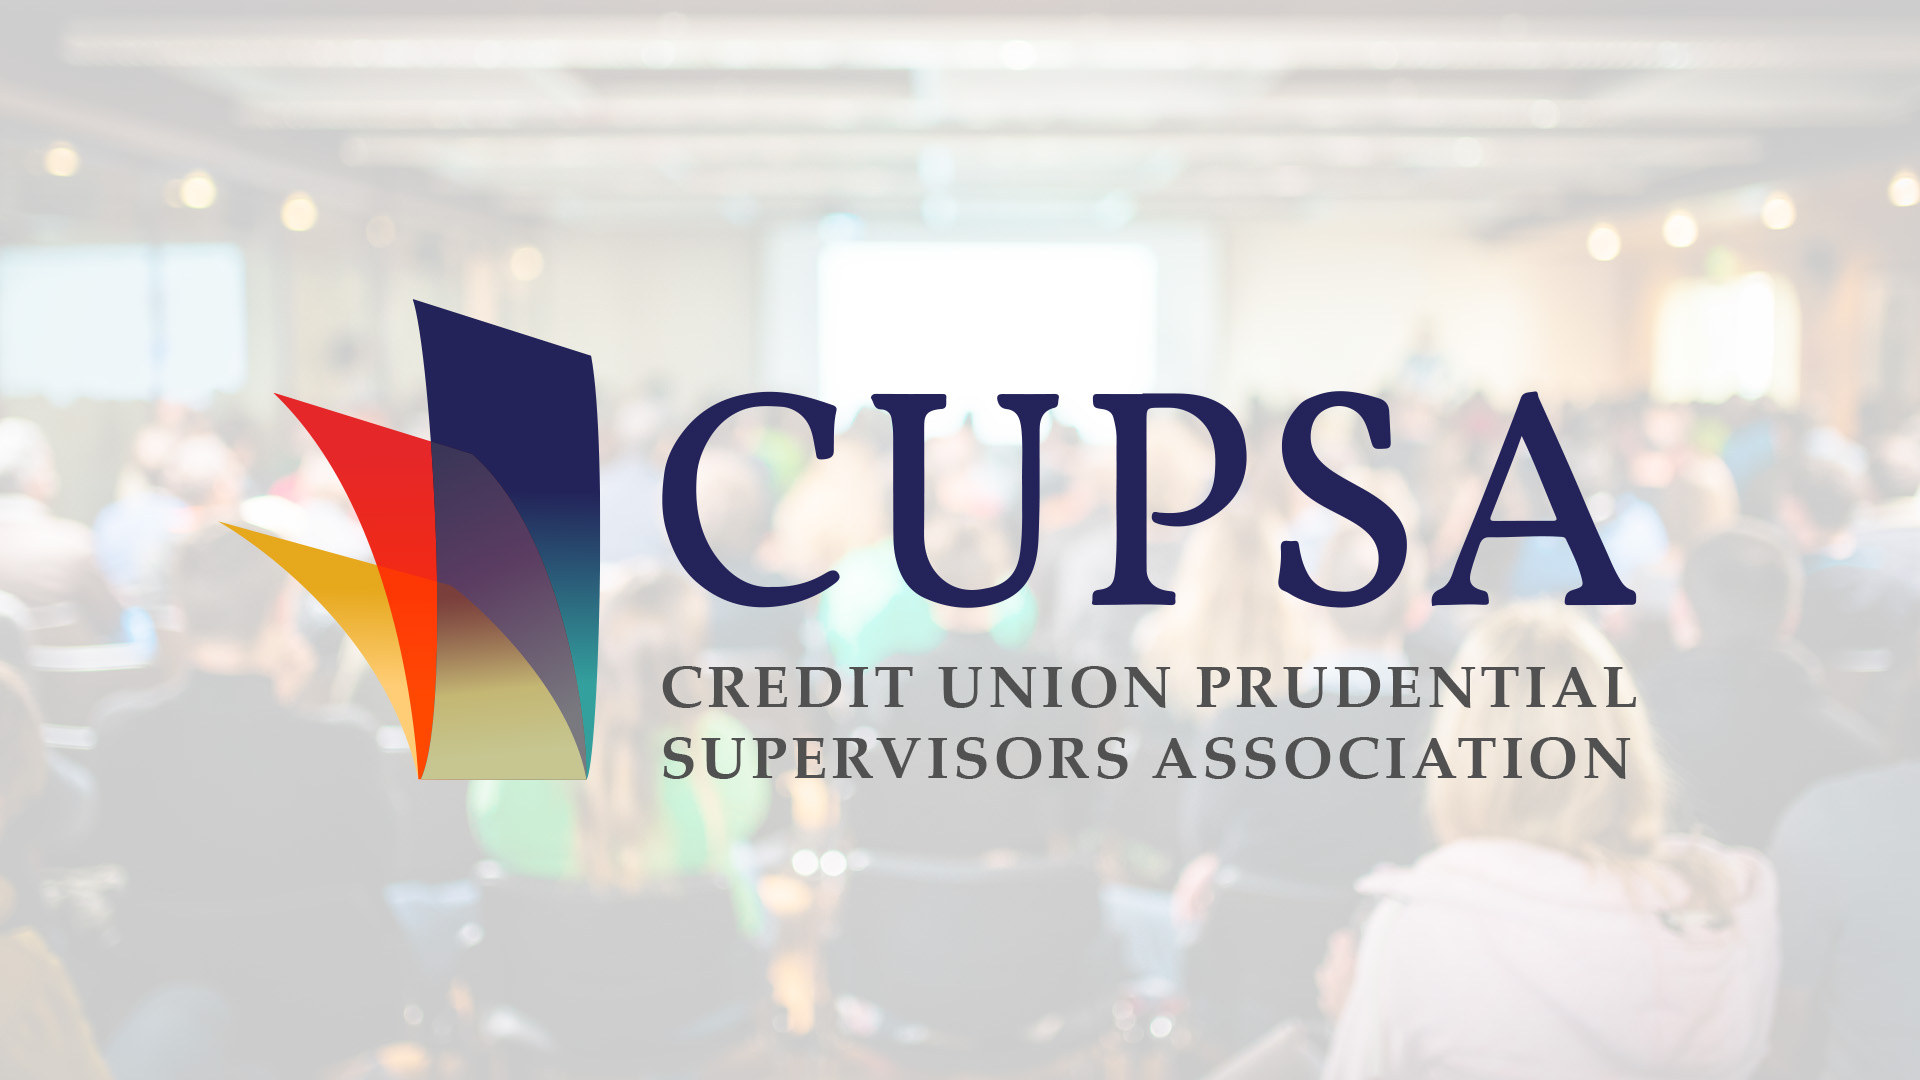 The Credit Union Prudential Supervisors Association (CUPSA) Annual Meeting